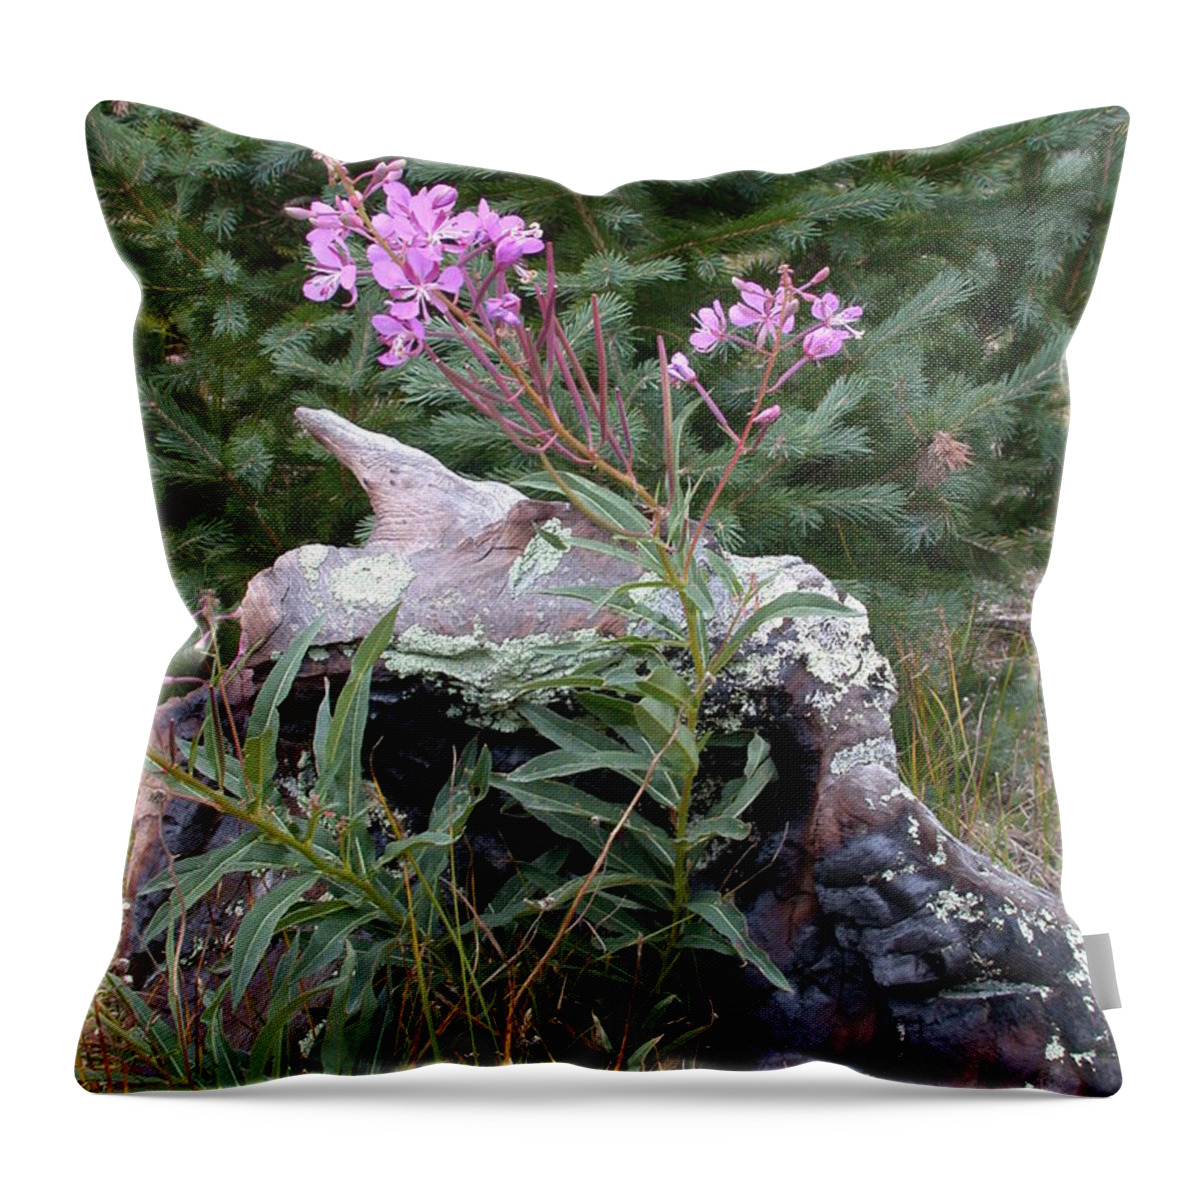 Tree Stump Throw Pillow featuring the photograph Flowering Stump by Shane Bechler